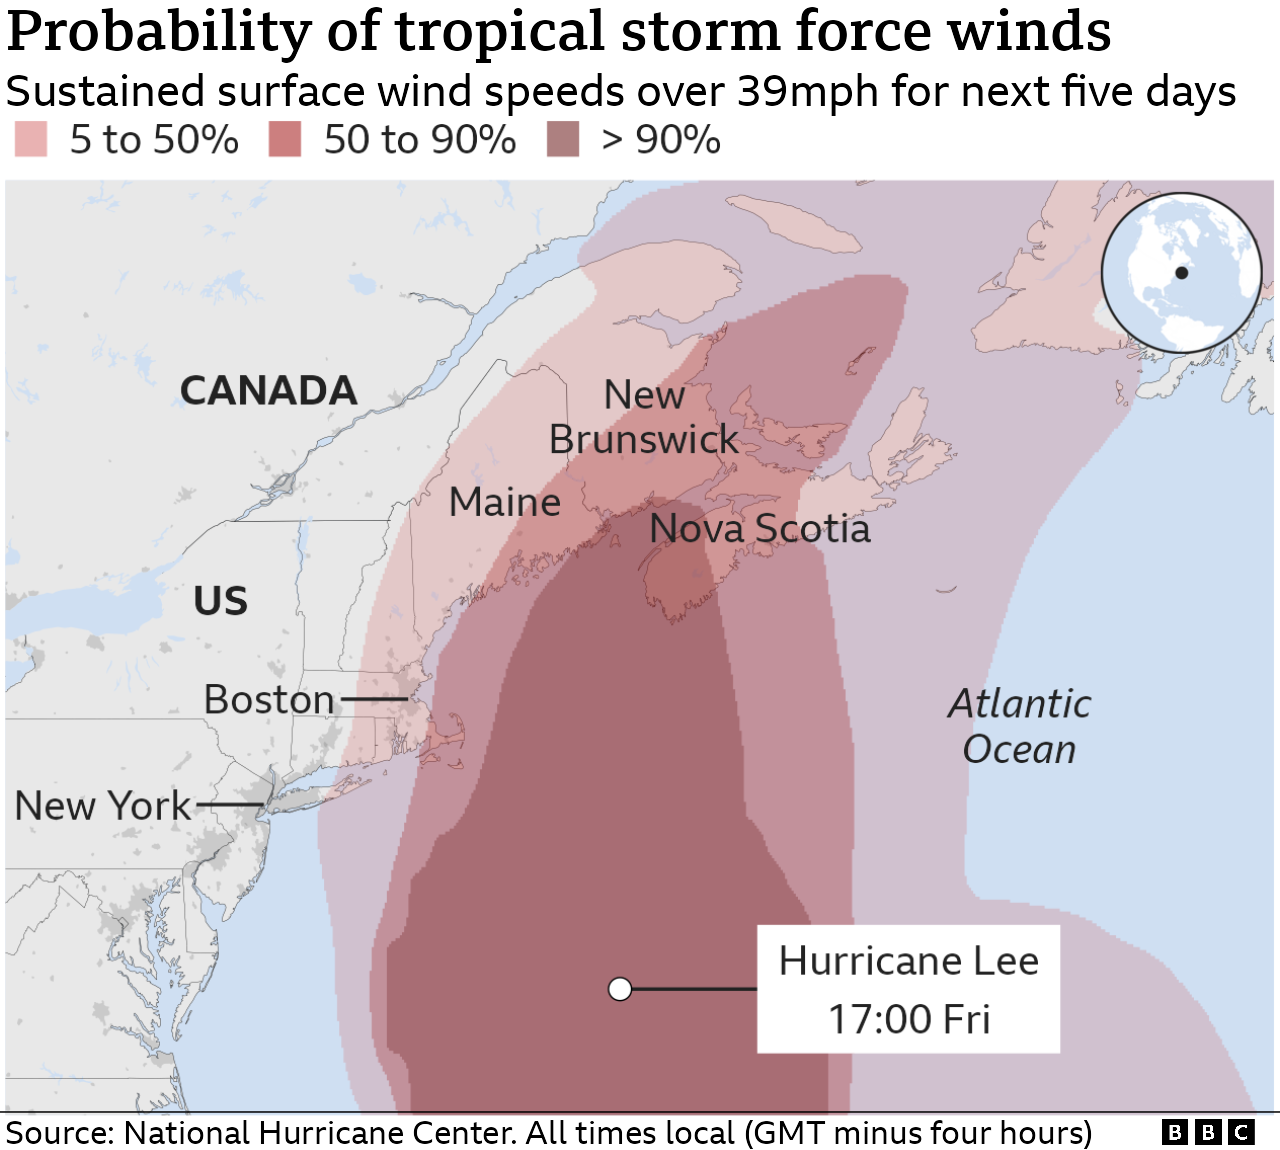 Map showing the probability that areas on the east coast of the US and Canada will experience tropical storm force winds in the next few days